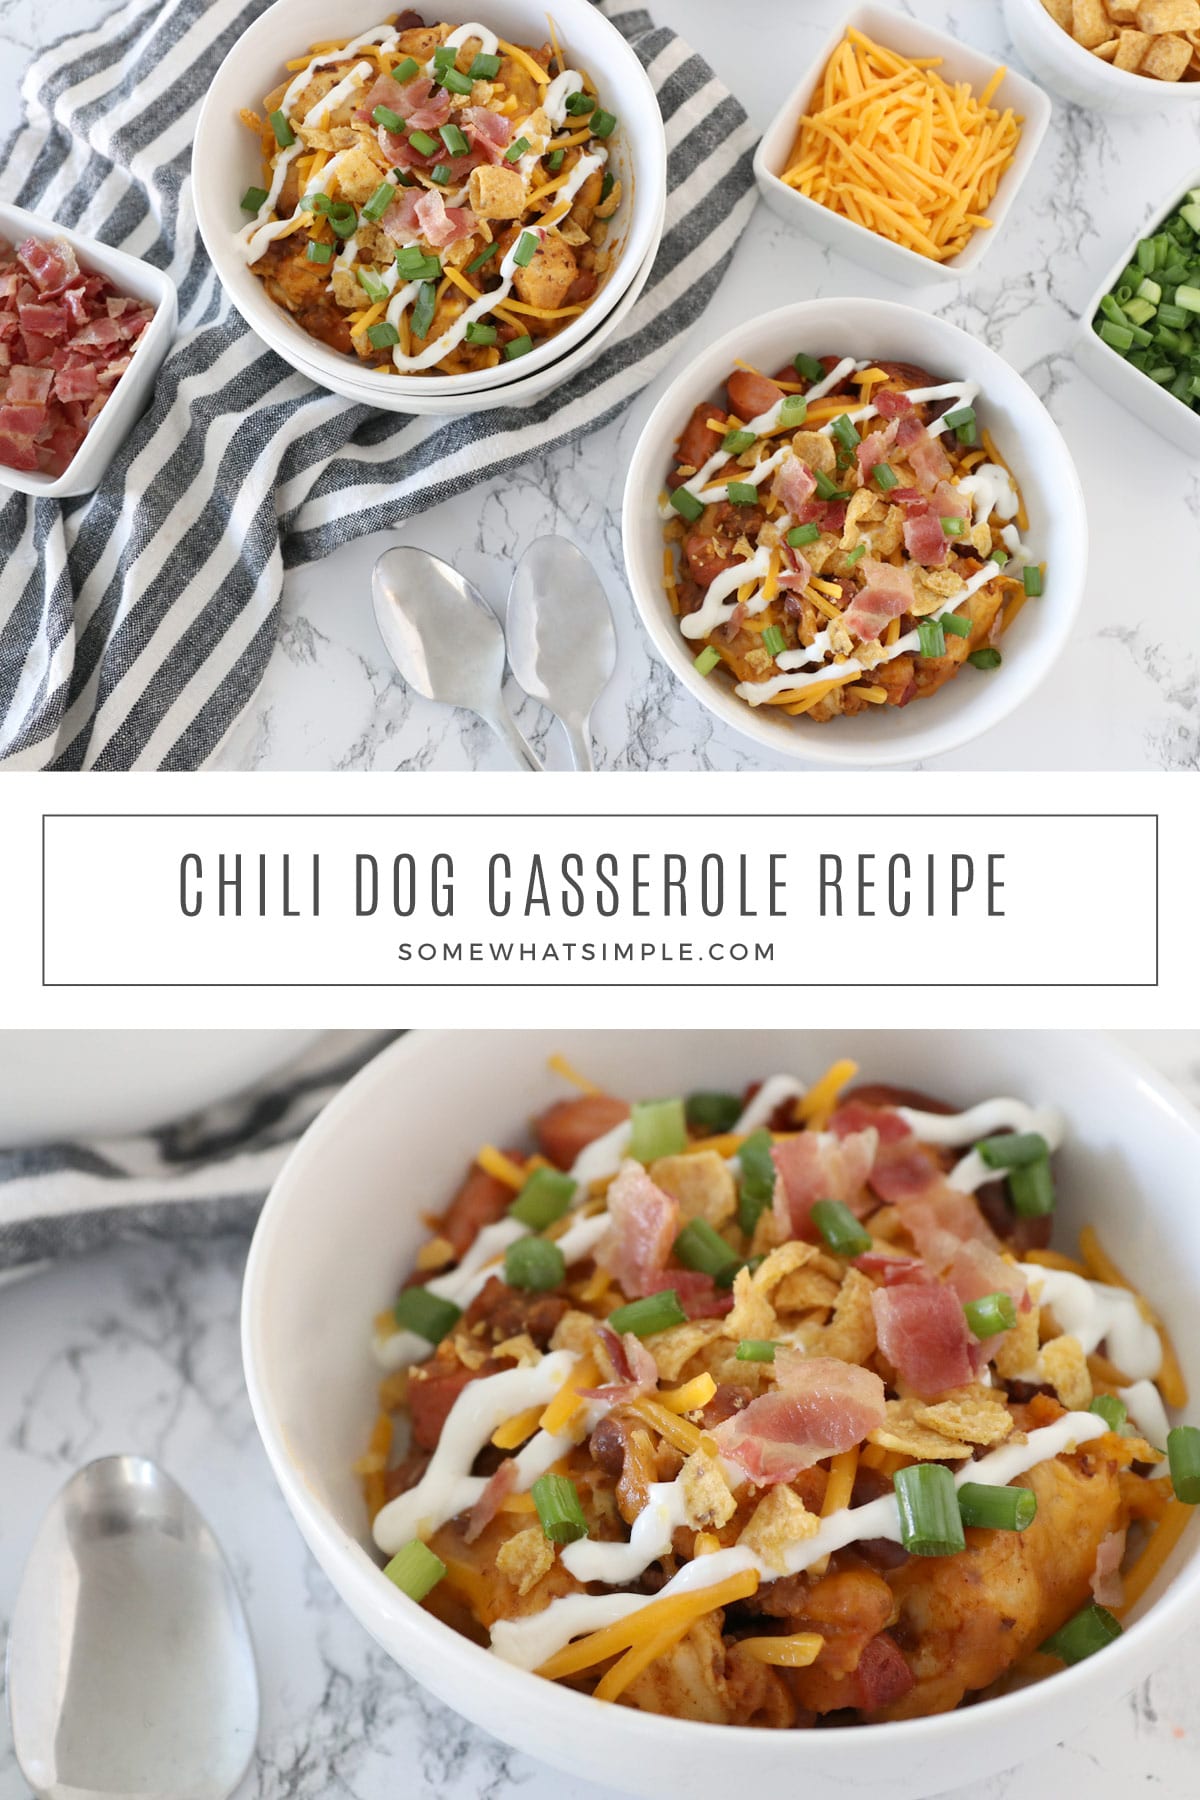 All the classic flavors you love but in casserole form! This Chili Dog Casserole is easy to make and easy to customize for picky eaters, too! via @somewhatsimple